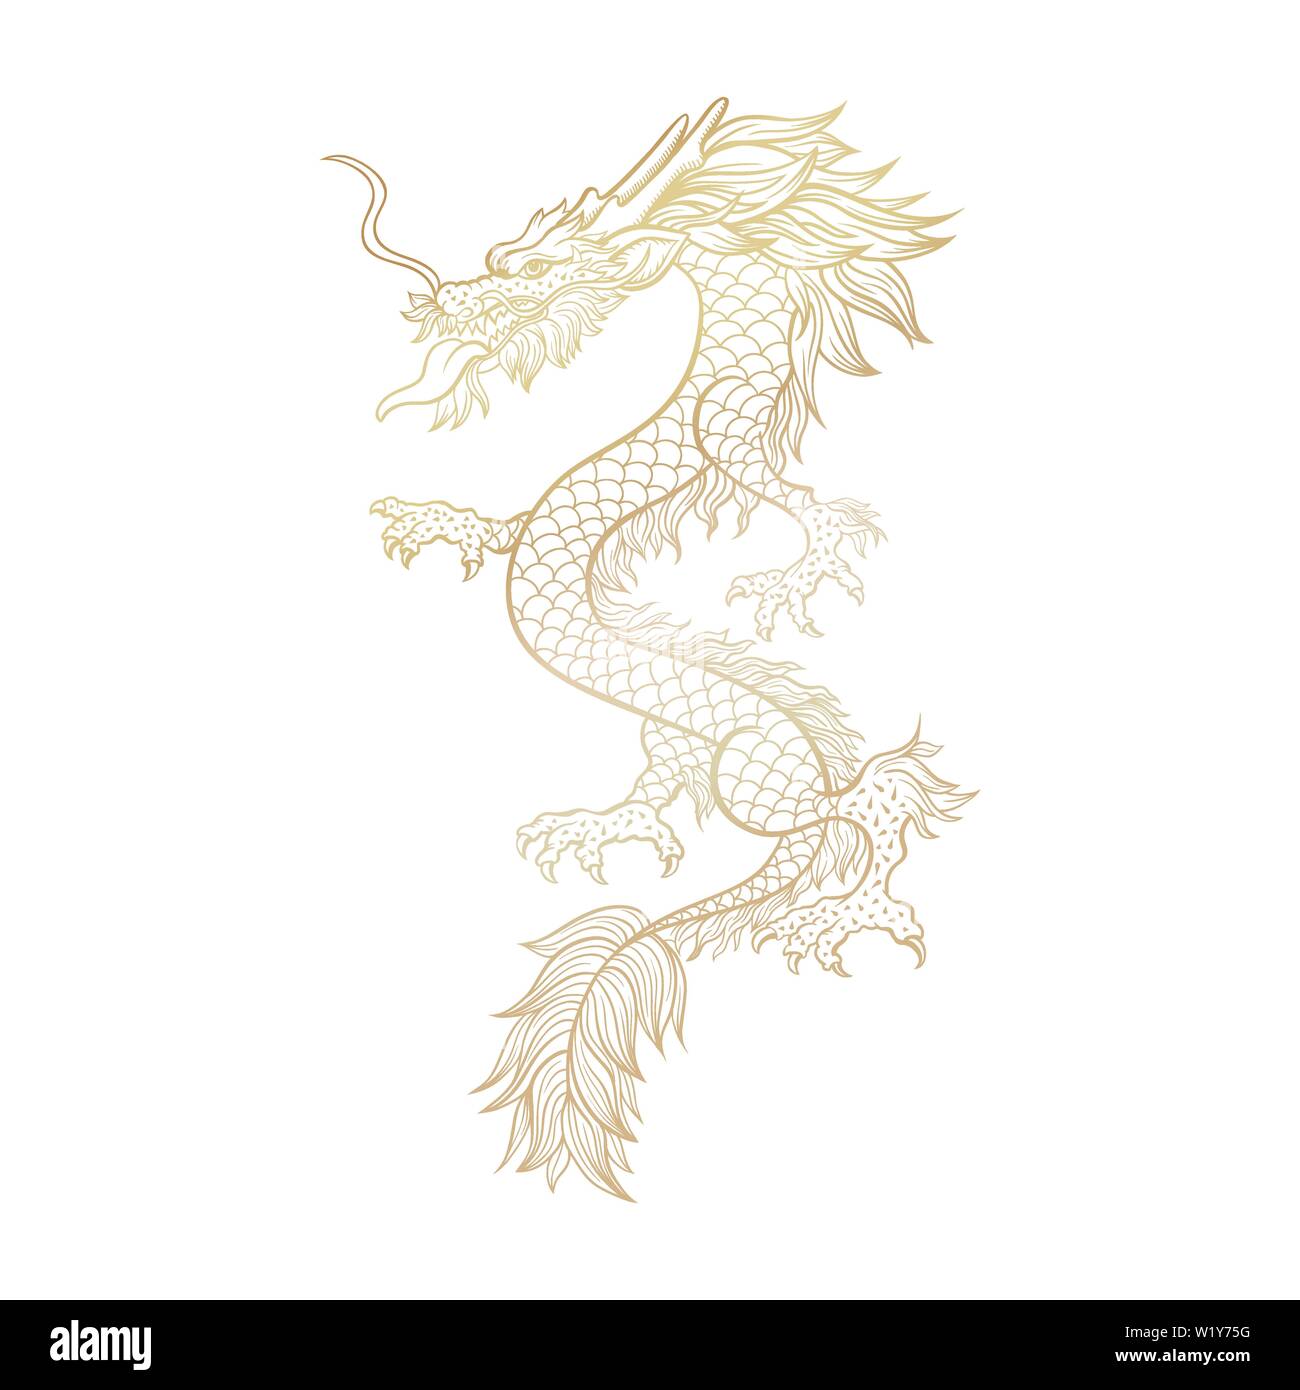 Golden Chinese mythic dragon laser cut file for plotter. Legendary oriental mythological creature on white background. Asian ceremonial serpent in threatening pose. Vertical hand drawn illustration. Stock Vector